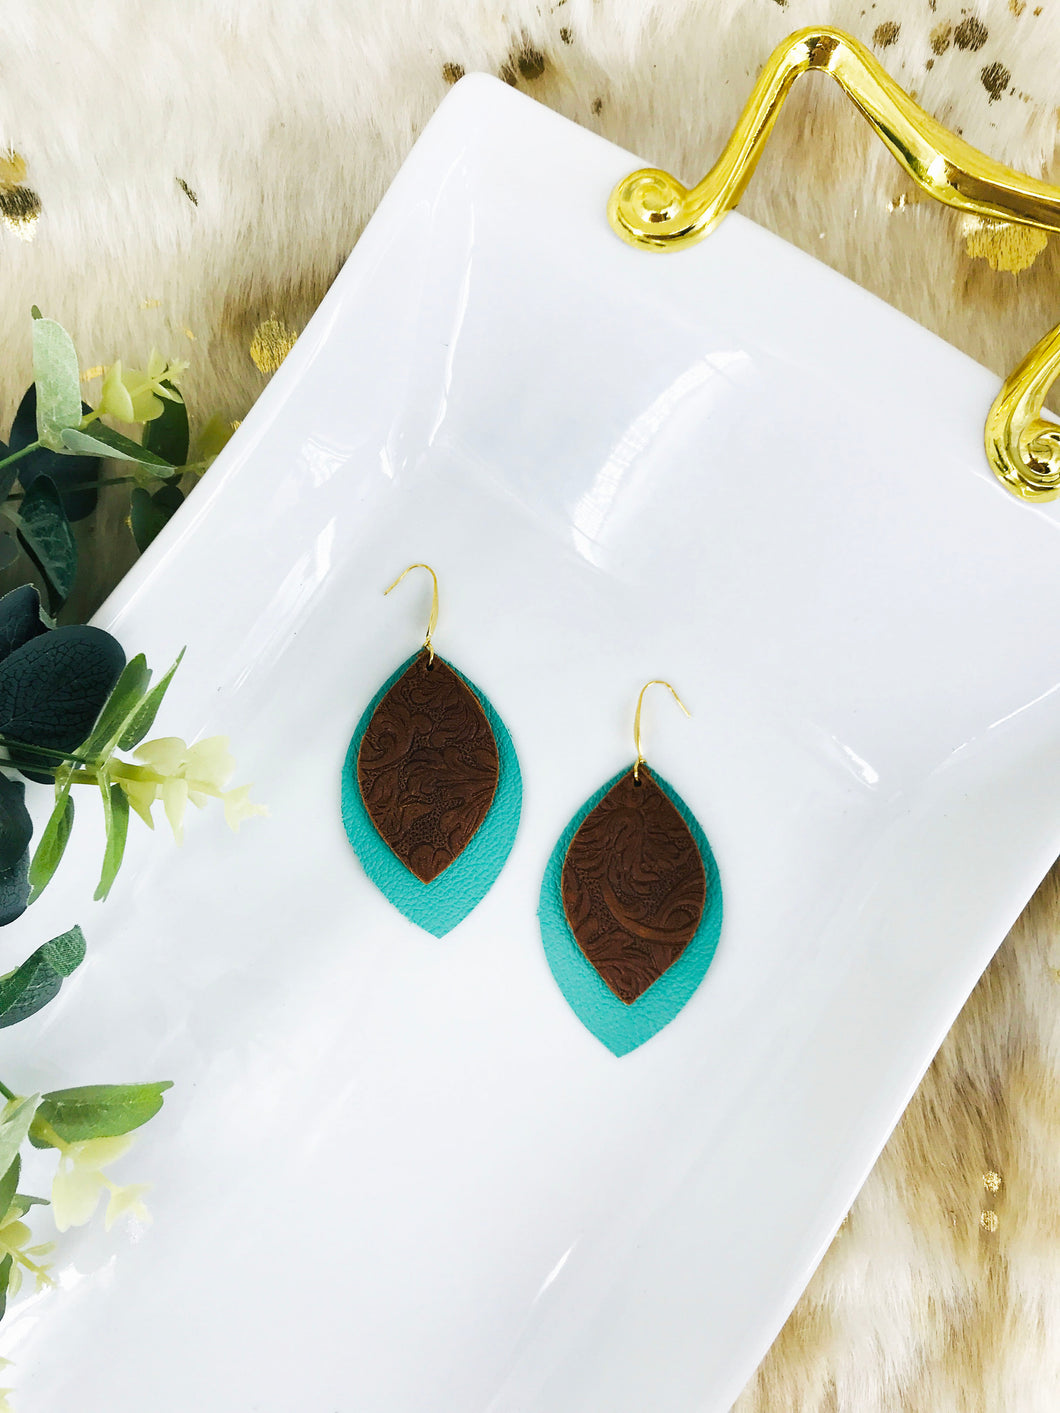 Aqua Leather and Brown Embossed Leather Earrings - E19-2953